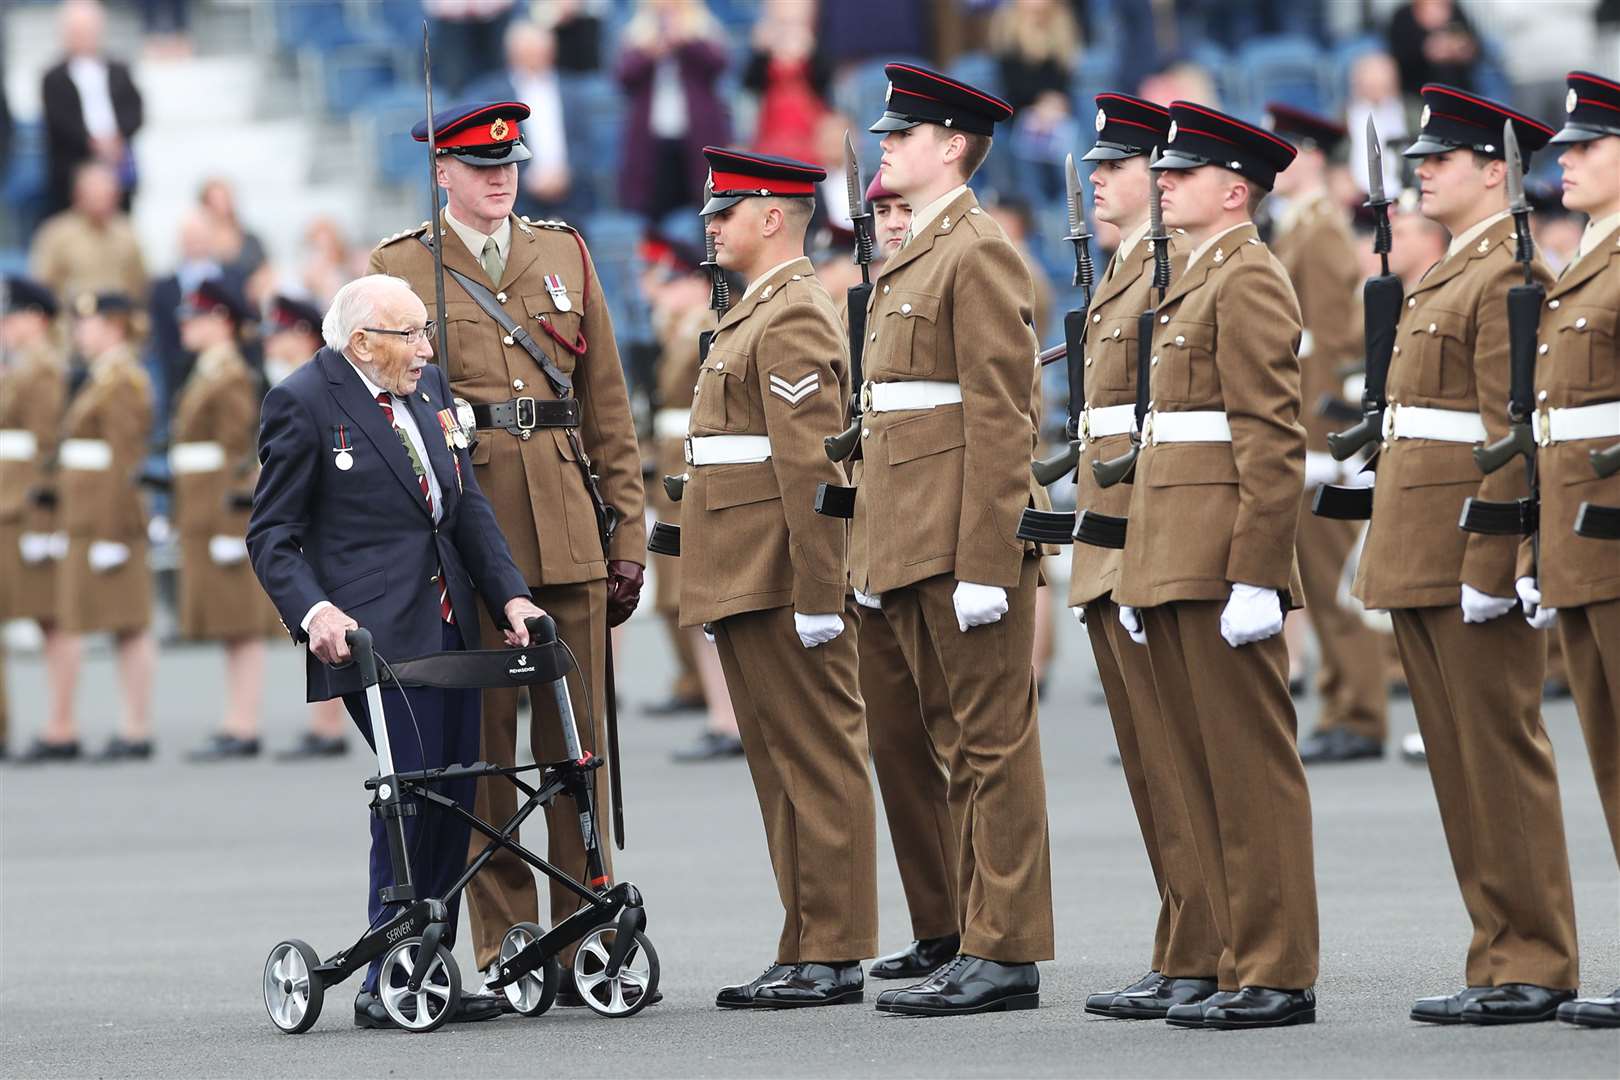 Soldiers from the Yorkshire Regiment will honour Captain Sir Tom Moore at his funeral (Danny Lawson/PA)